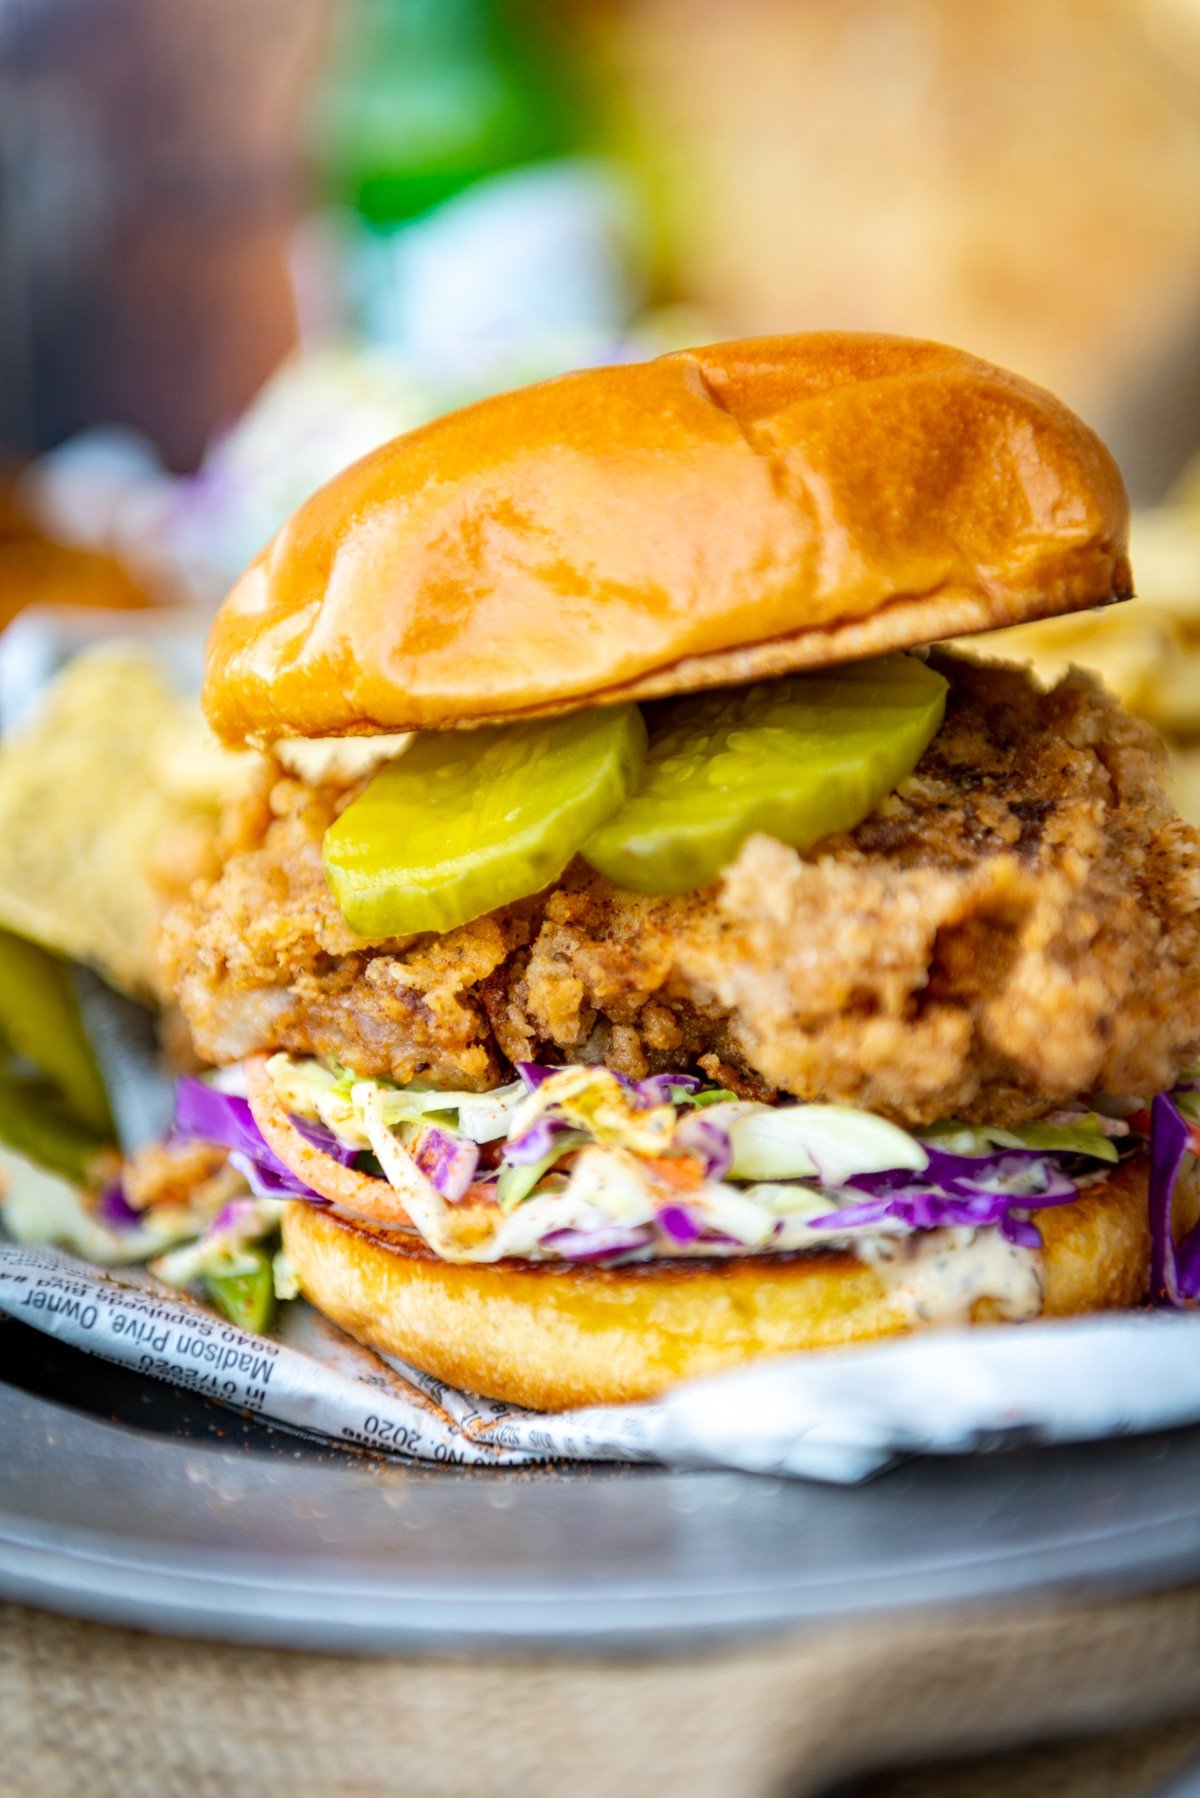 crispy fried chicken sandwich with ranch slaw and pickles waiting to be devoured